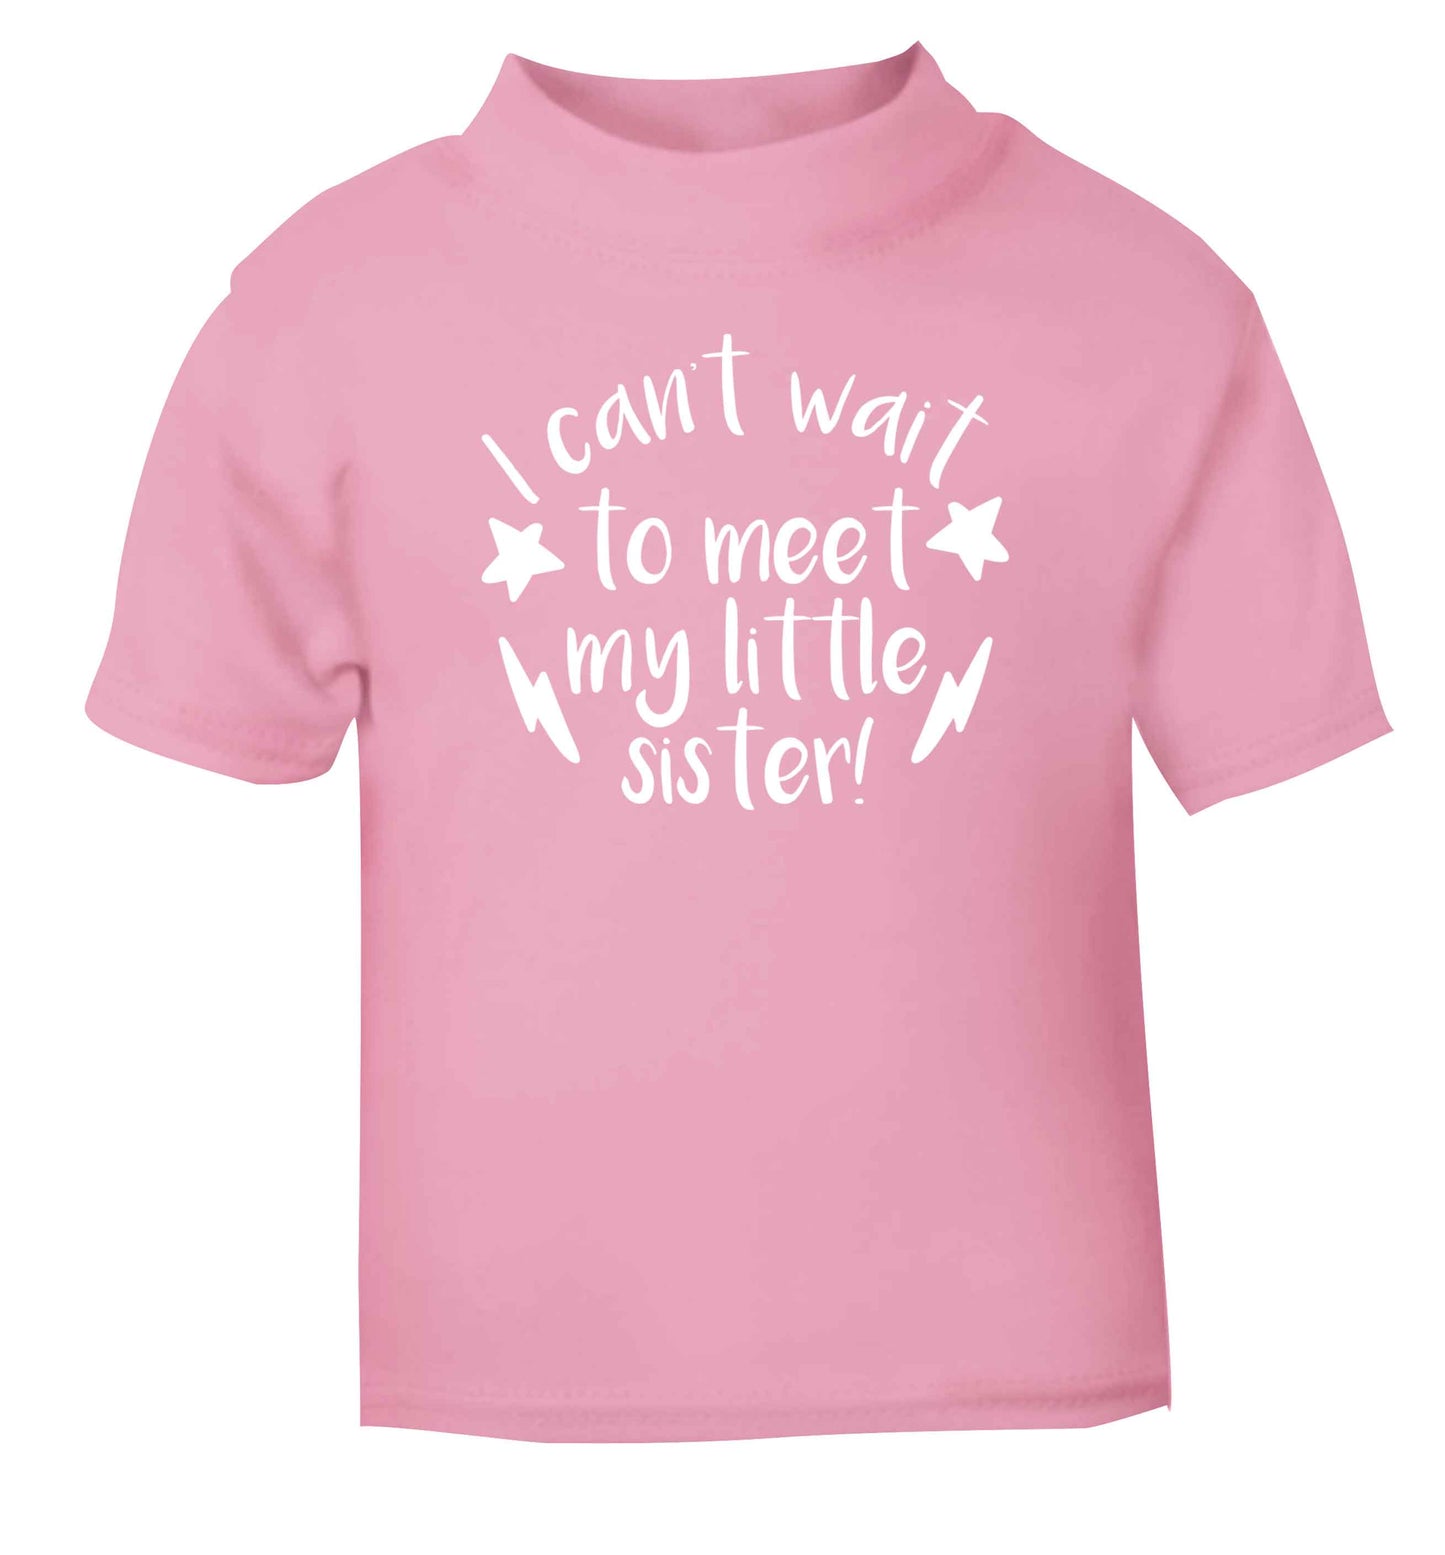 Something special growing inside it's my little sister I can't wait to say hi! light pink Baby Toddler Tshirt 2 Years